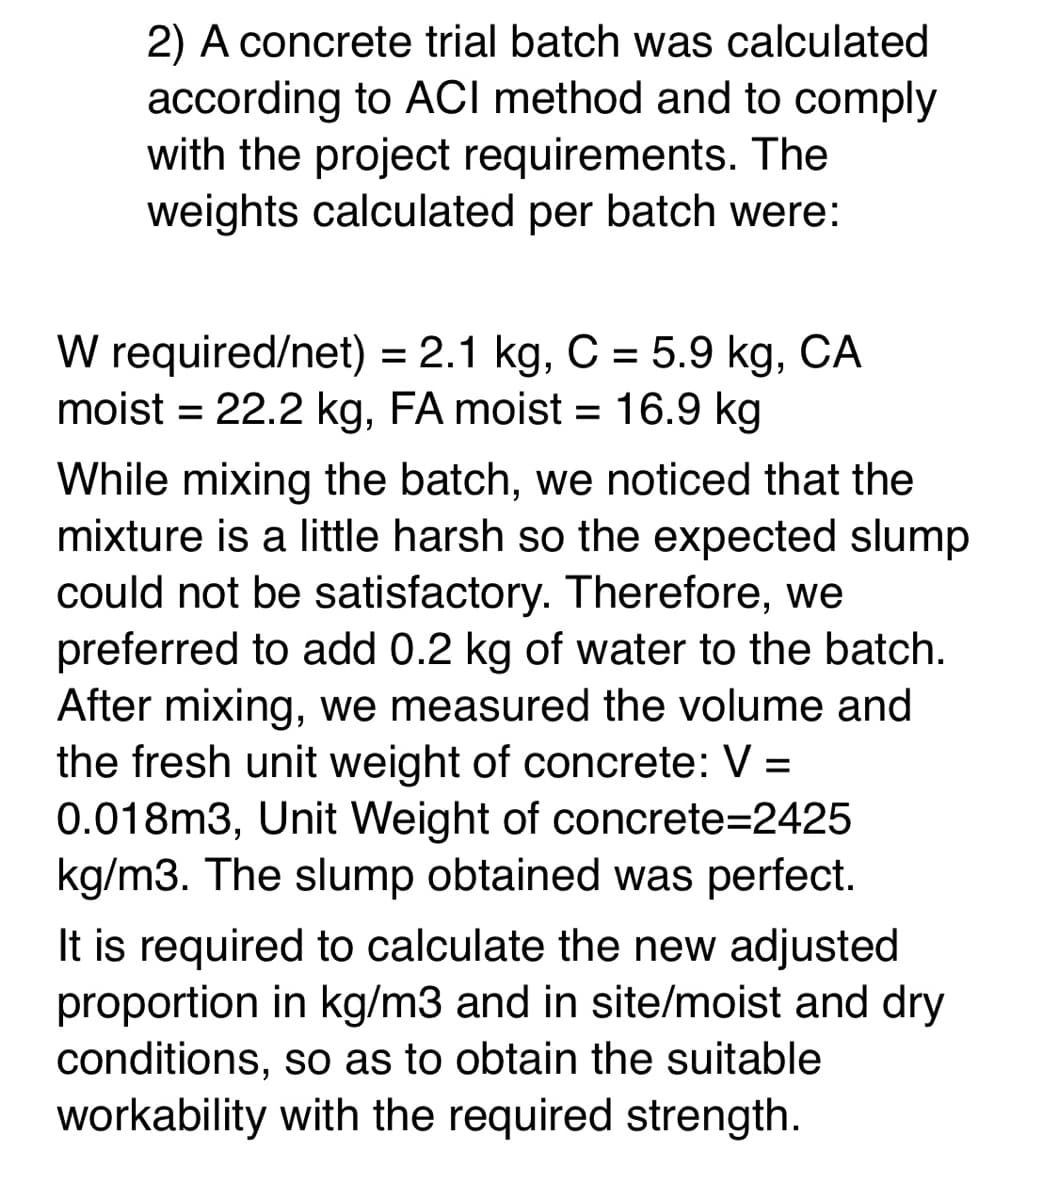 2) A concrete trial batch was calculated
according to ACI method and to comply
with the project requirements. The
weights calculated per batch were:
W required/net) = 2.1 kg, C = 5.9 kg, CA
moist = 22.2 kg, FA moist = 16.9 kg
%D
While mixing the batch, we noticed that the
mixture is a little harsh so the expected slump
could not be satisfactory. Therefore, we
preferred to add 0.2 kg of water to the batch.
After mixing, we measured the volume and
the fresh unit weight of concrete: V =
0.018m3, Unit Weight of concrete=2425
kg/m3. The slump obtained was perfect.
It is required to calculate the new adjusted
proportion in kg/m3 and in site/moist and dry
conditions, so as to obtain the suitable
workability with the required strength.
